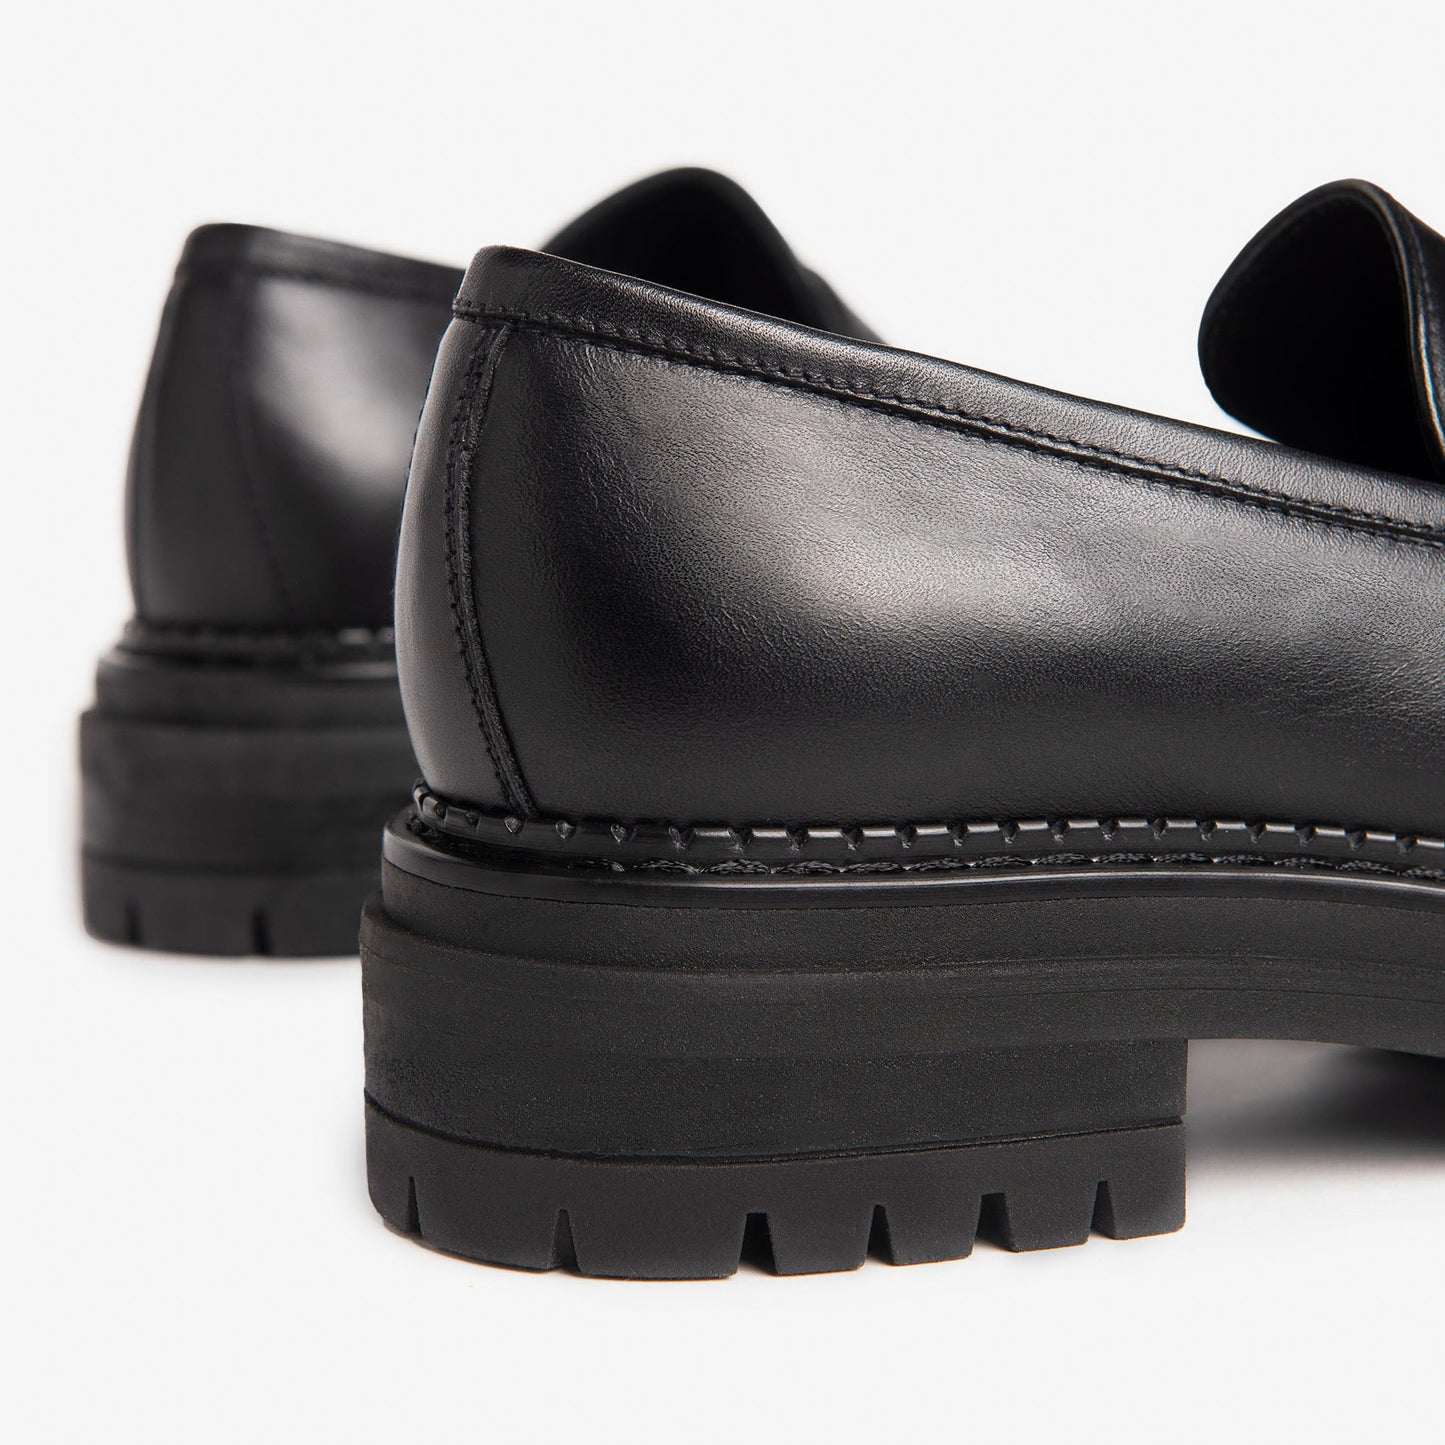 Black Gumball Loafers 